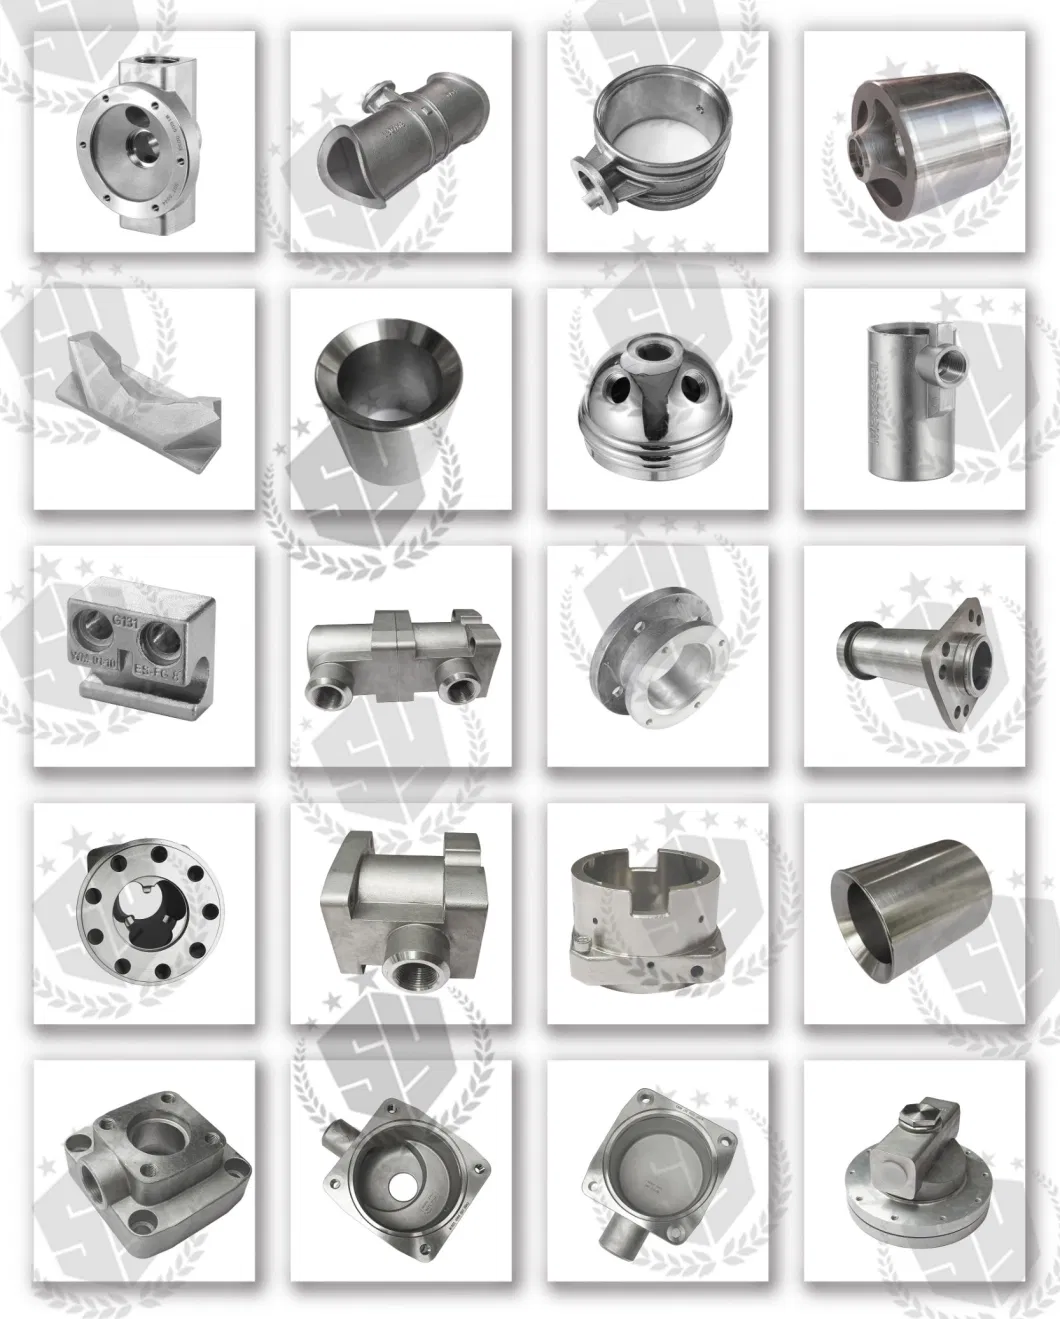 OEM Customize Precision Aluminum Alloy/Steel/Stainless Steel Machinery Parts Die Casting/Lost Wax Cast/Investment Casting/CNC Machining spare parts Casting